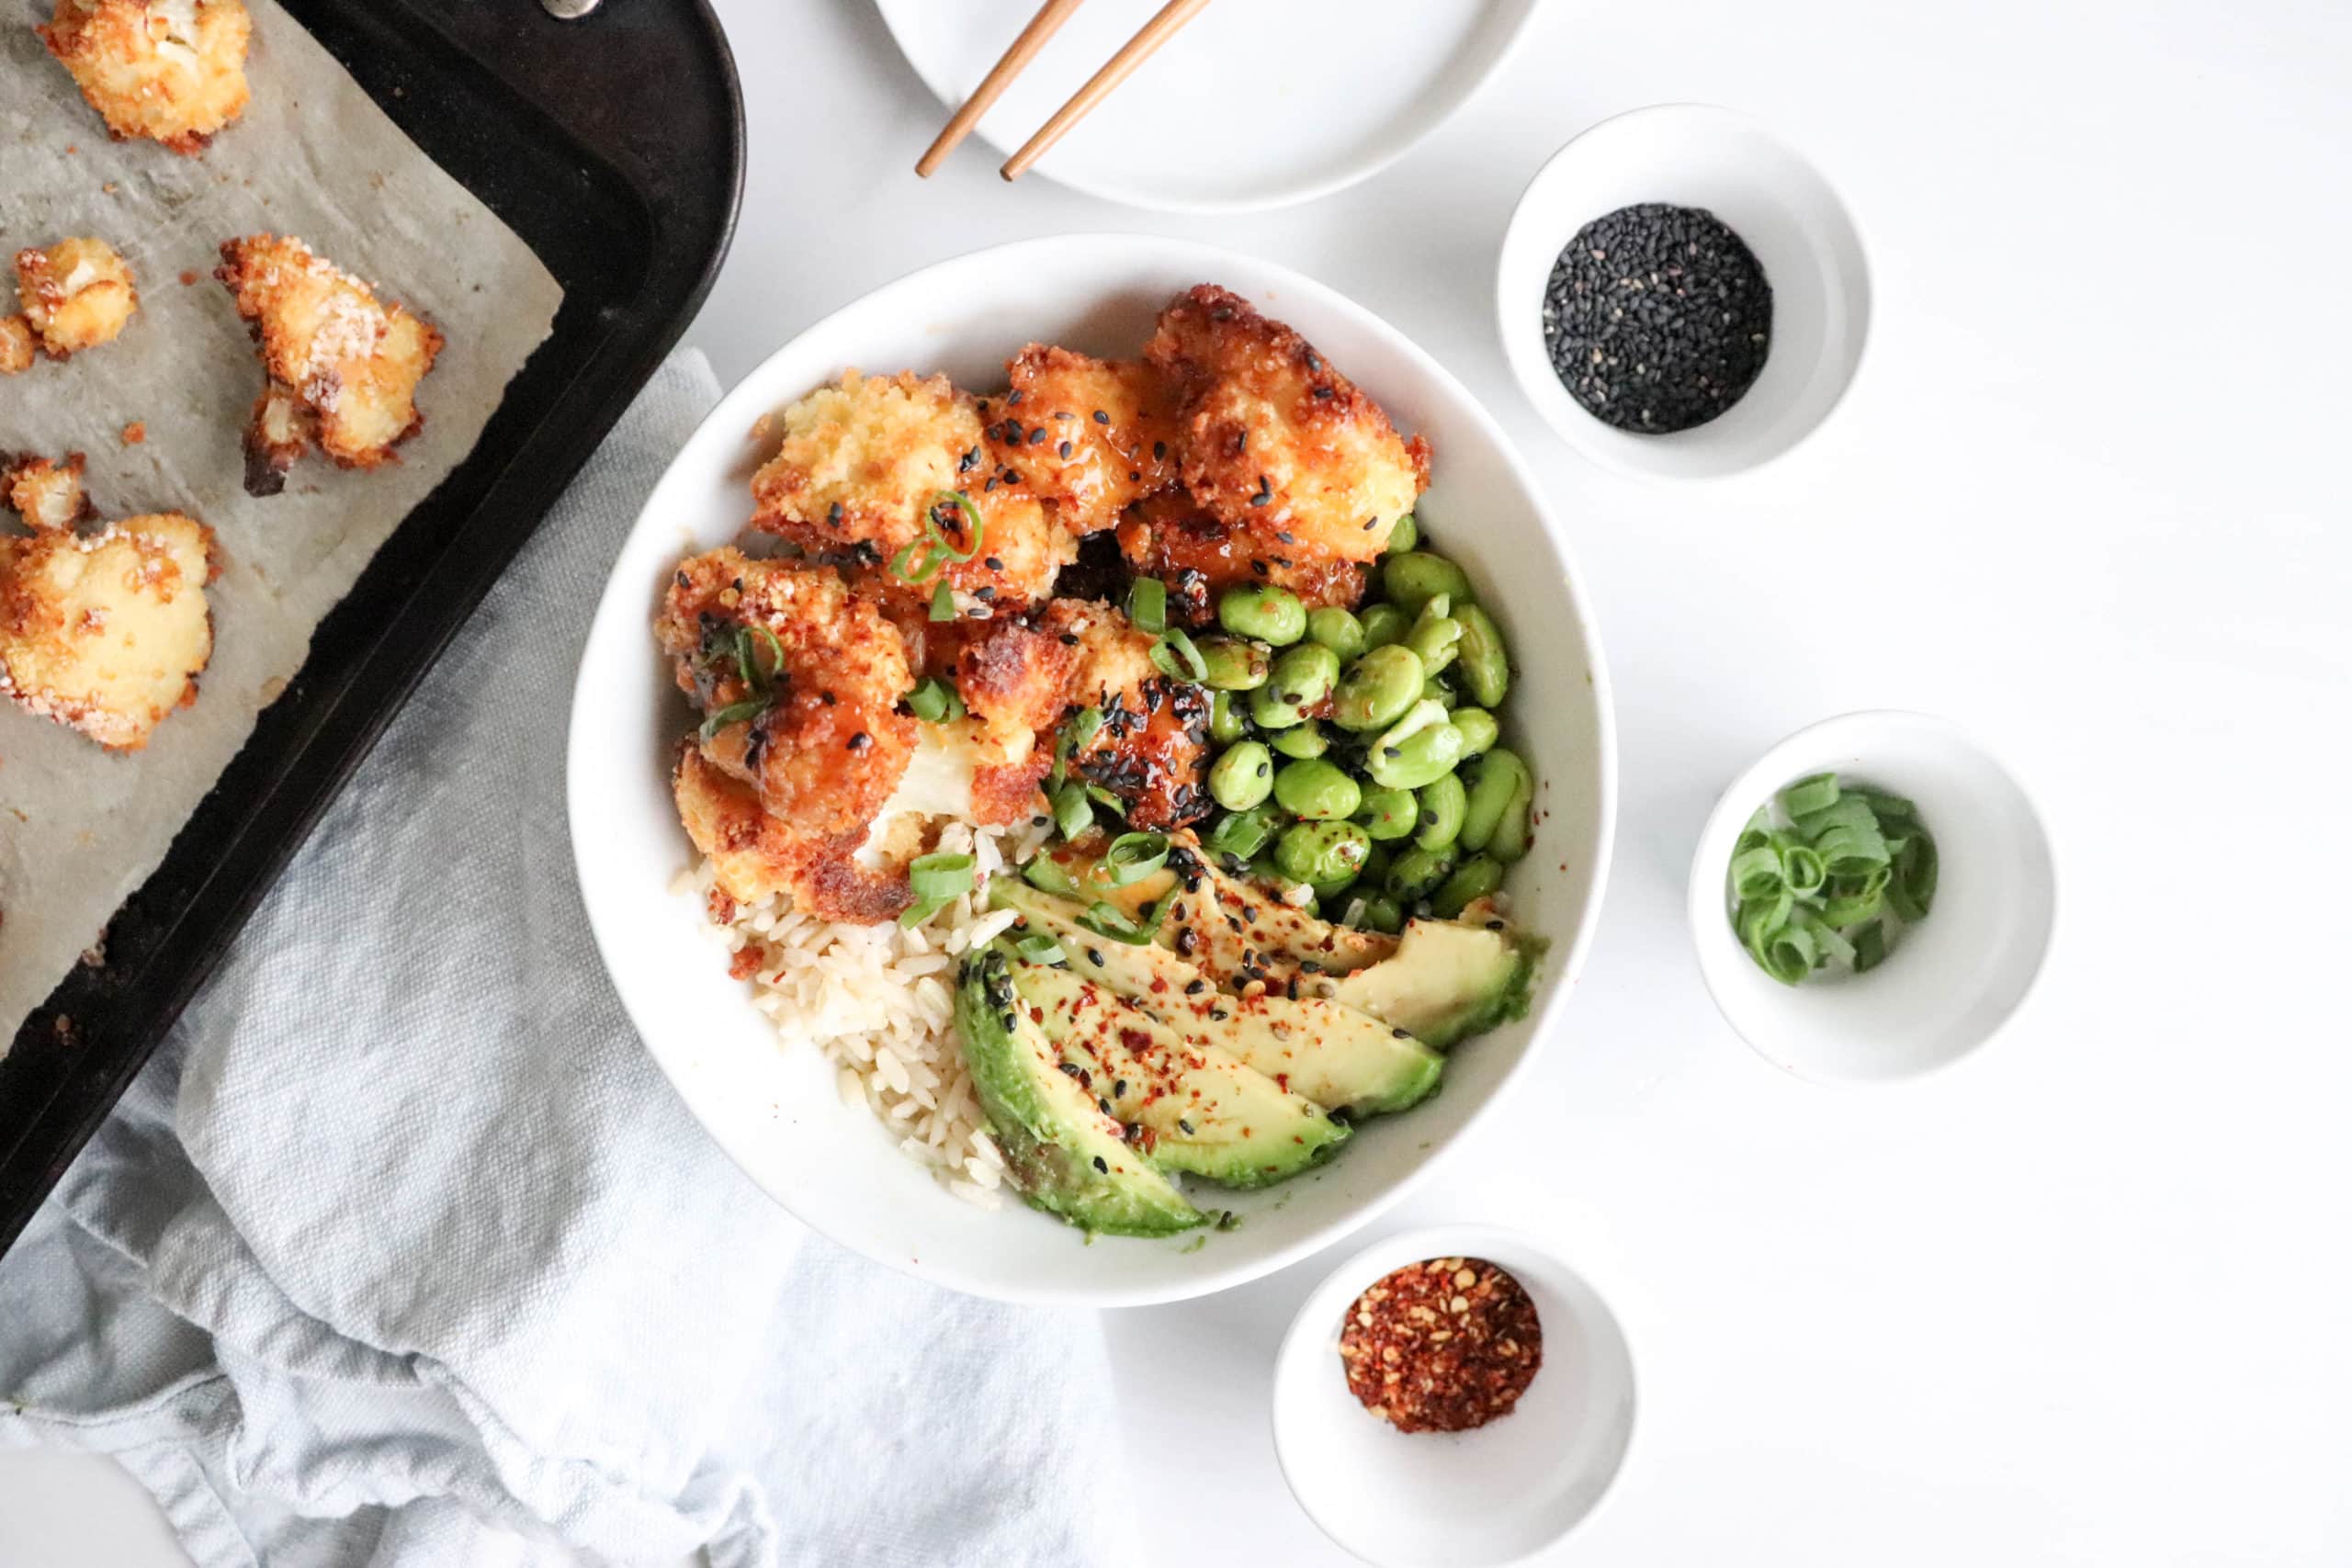 Crispy baked cauliflower bowl on a white surface with a blue kitchen towel underneath it. Ingredients include: rice, avocado, edamame, crispy baked cauliflower.